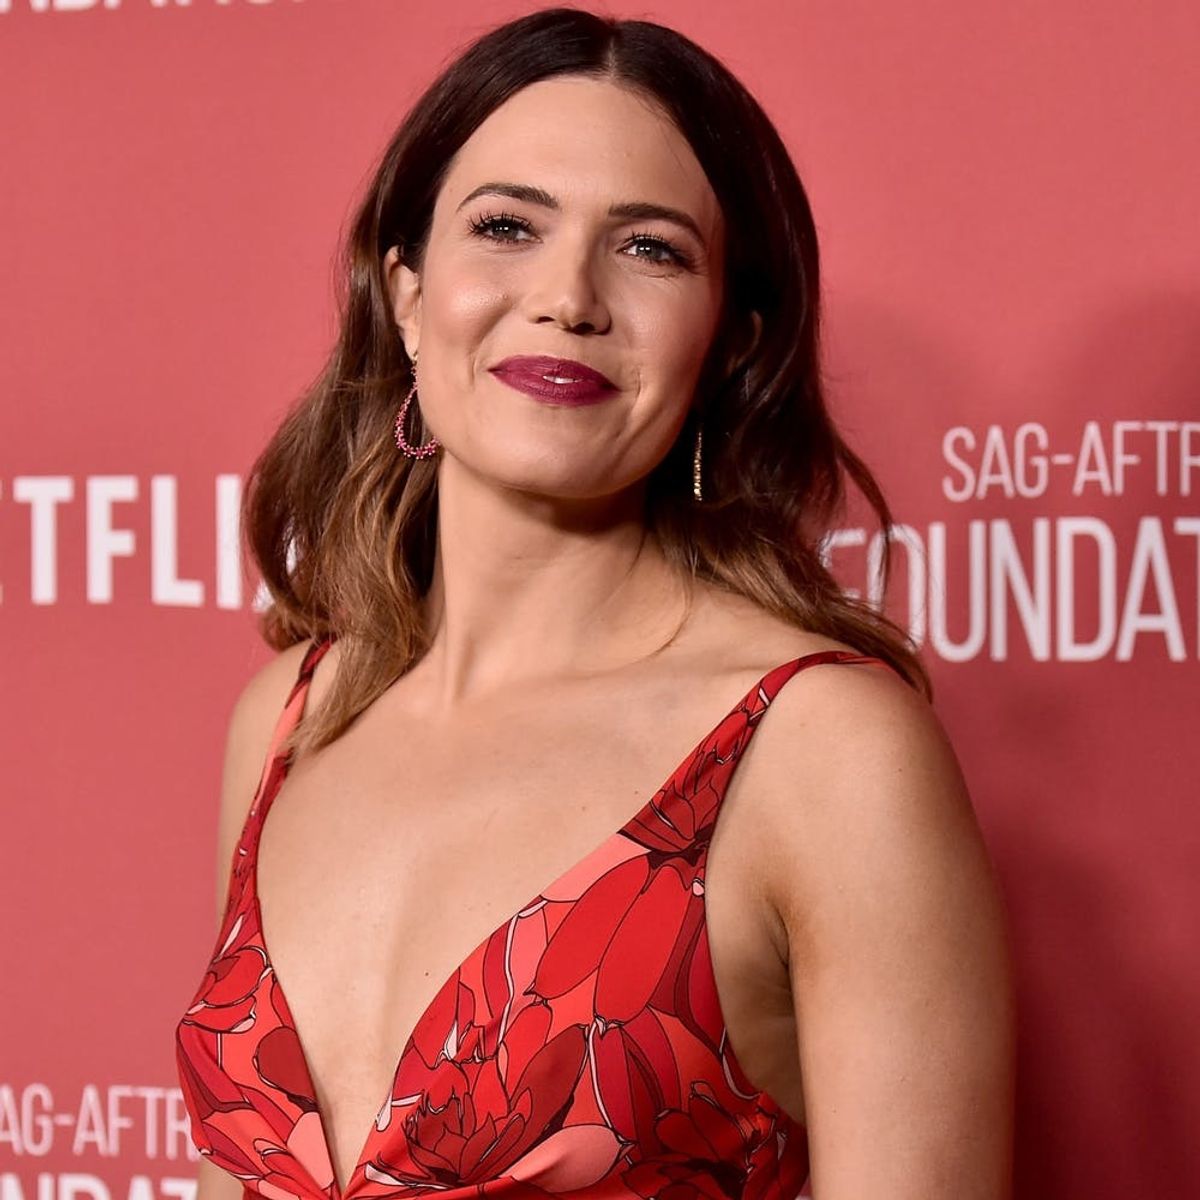 Mandy Moore Wants to Start a Family With Taylor Goldsmith ‘Sooner Rather Than Later’